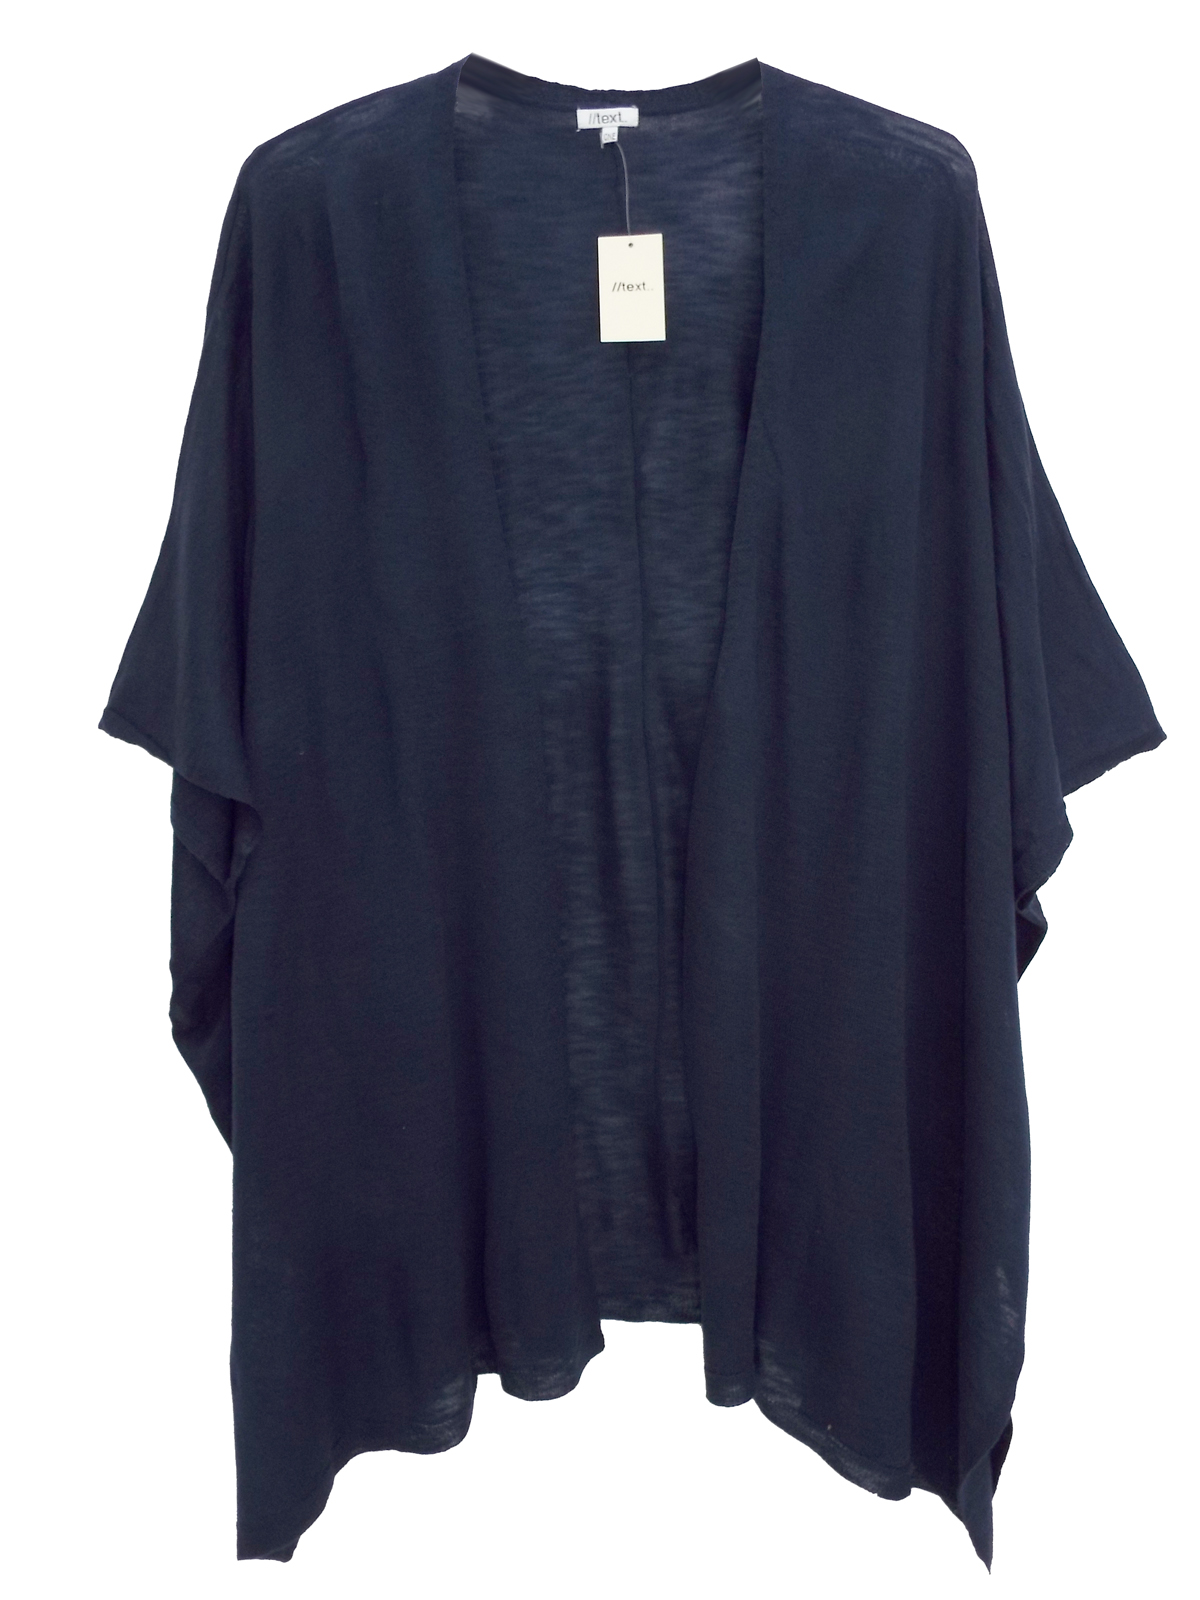 //text.. - - NAVY Oversized Knitted Open Front Cardigan - Fits Upto Size 22